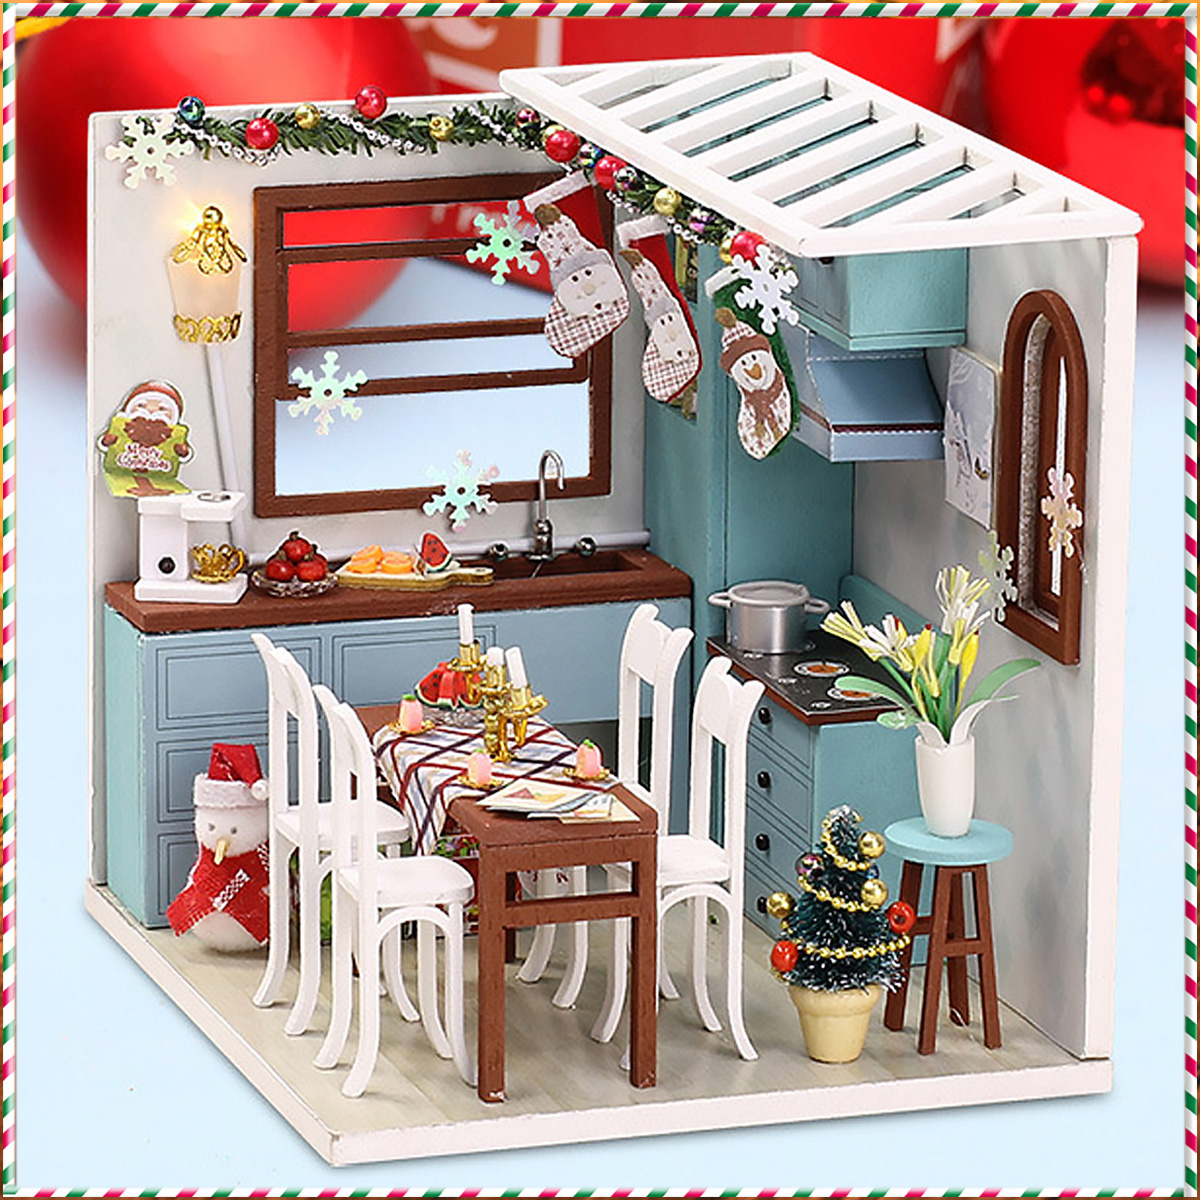 Wooden-Dining-Room-DIY-Handmade-Assemble-Doll-House-Miniature-Furniture-Kit-Education-Toy-with-LED-L-1737848-2